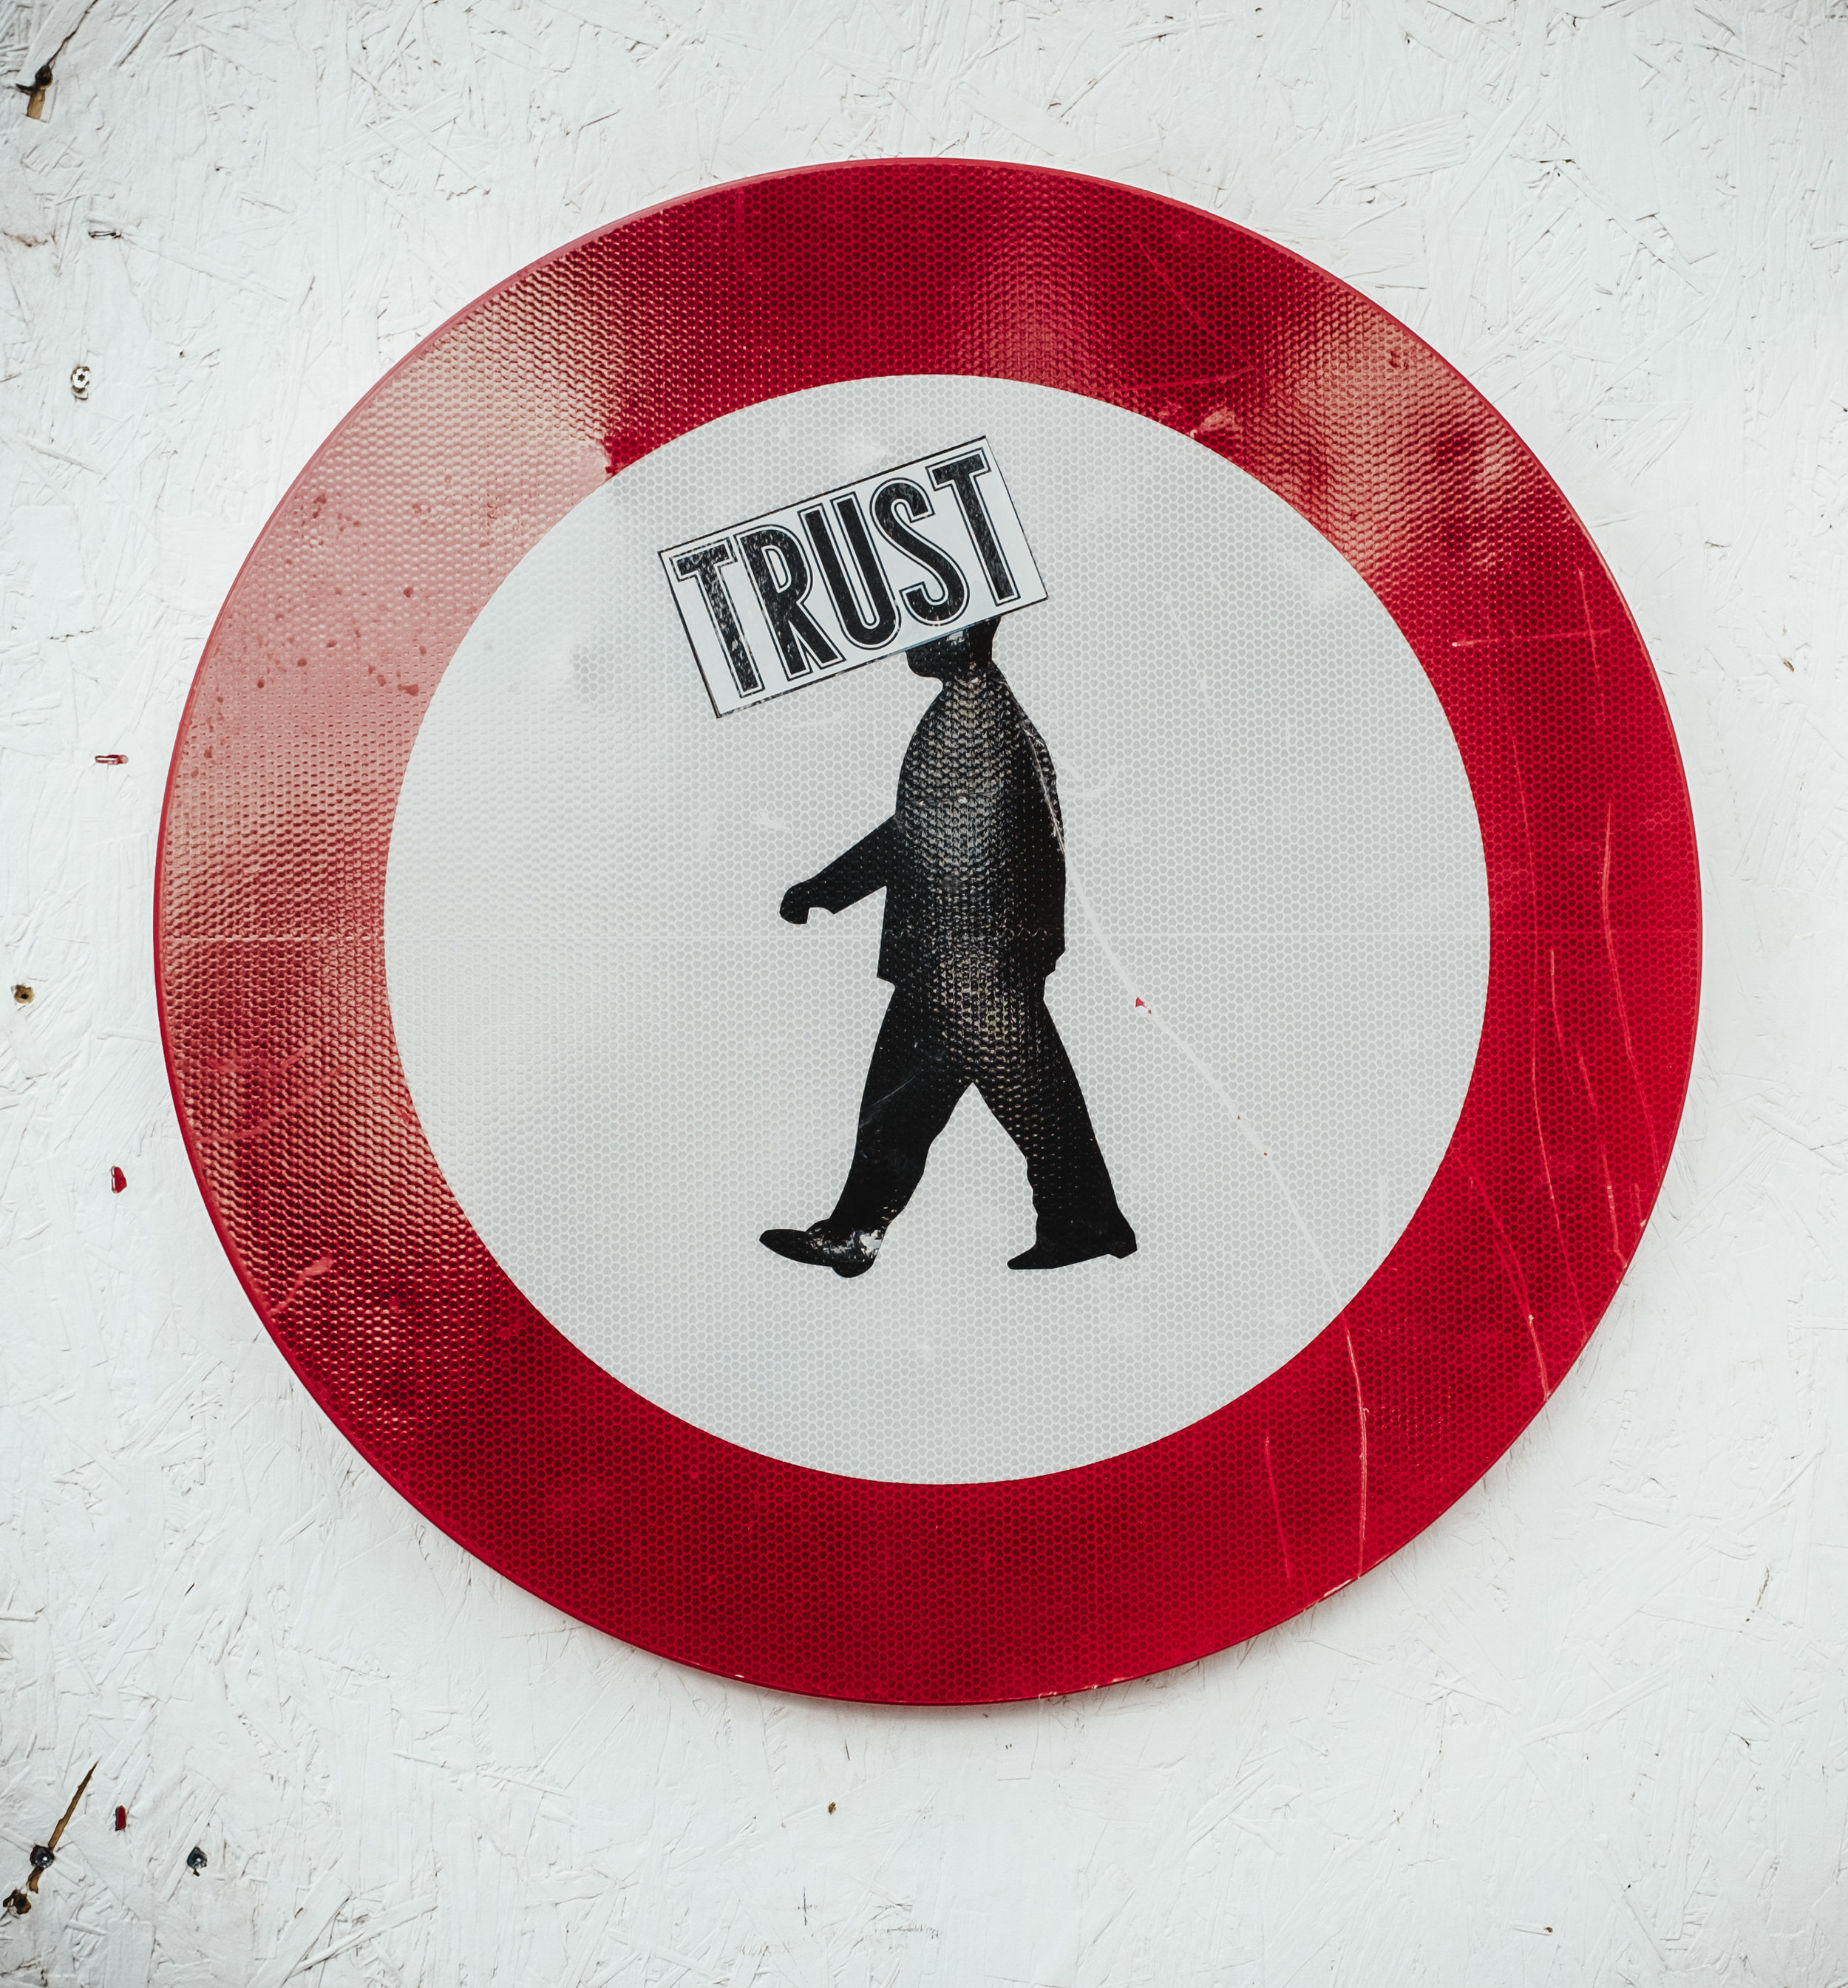 6 Signs your website is not trustworthy